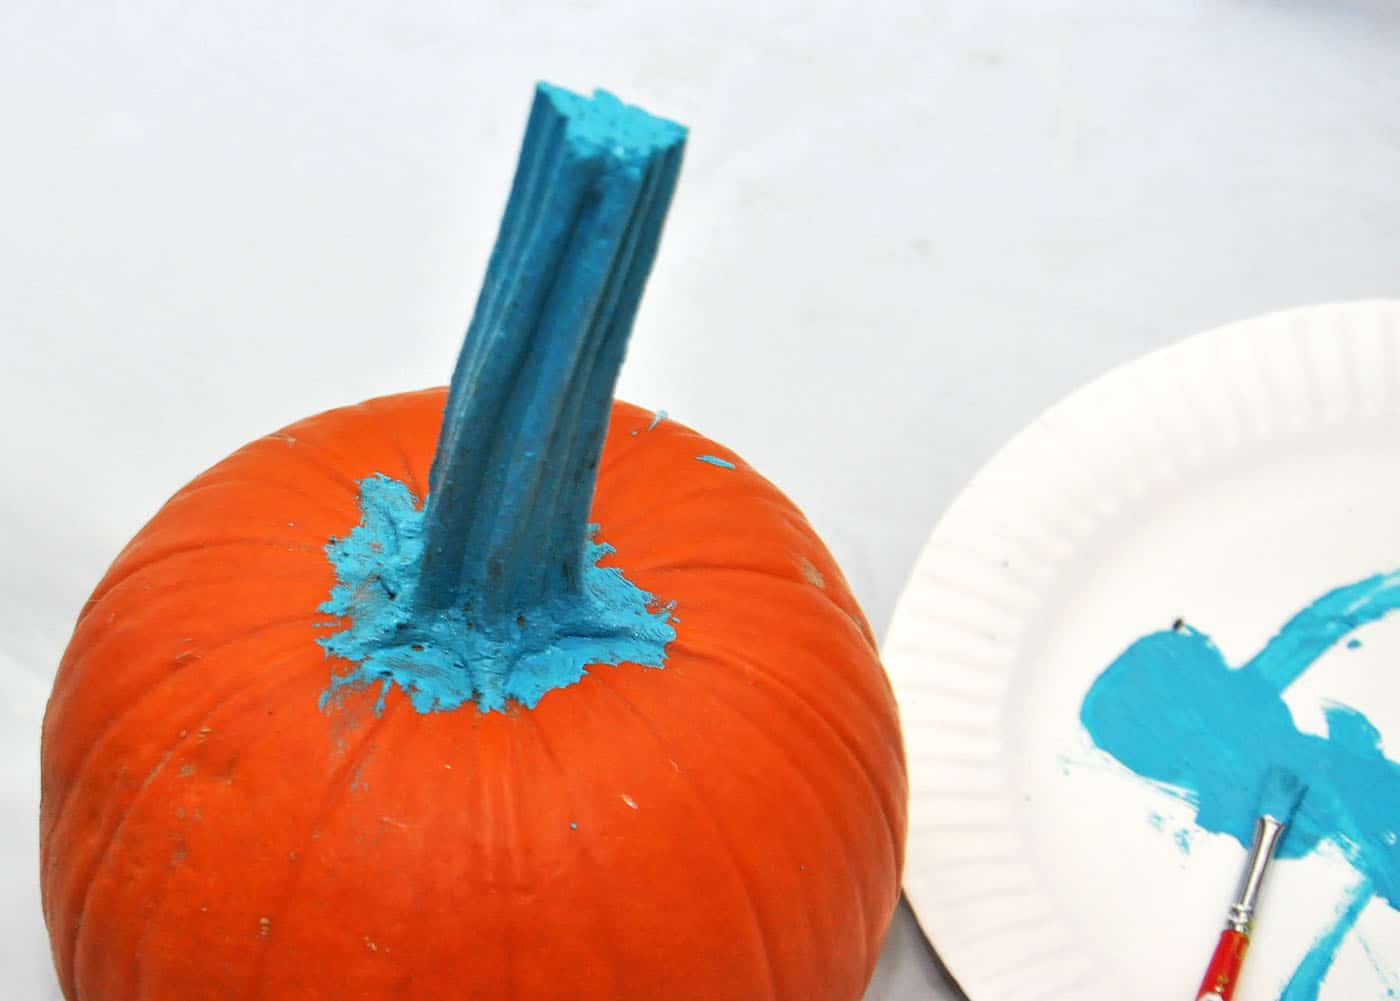 Pumpkin with a painted stem